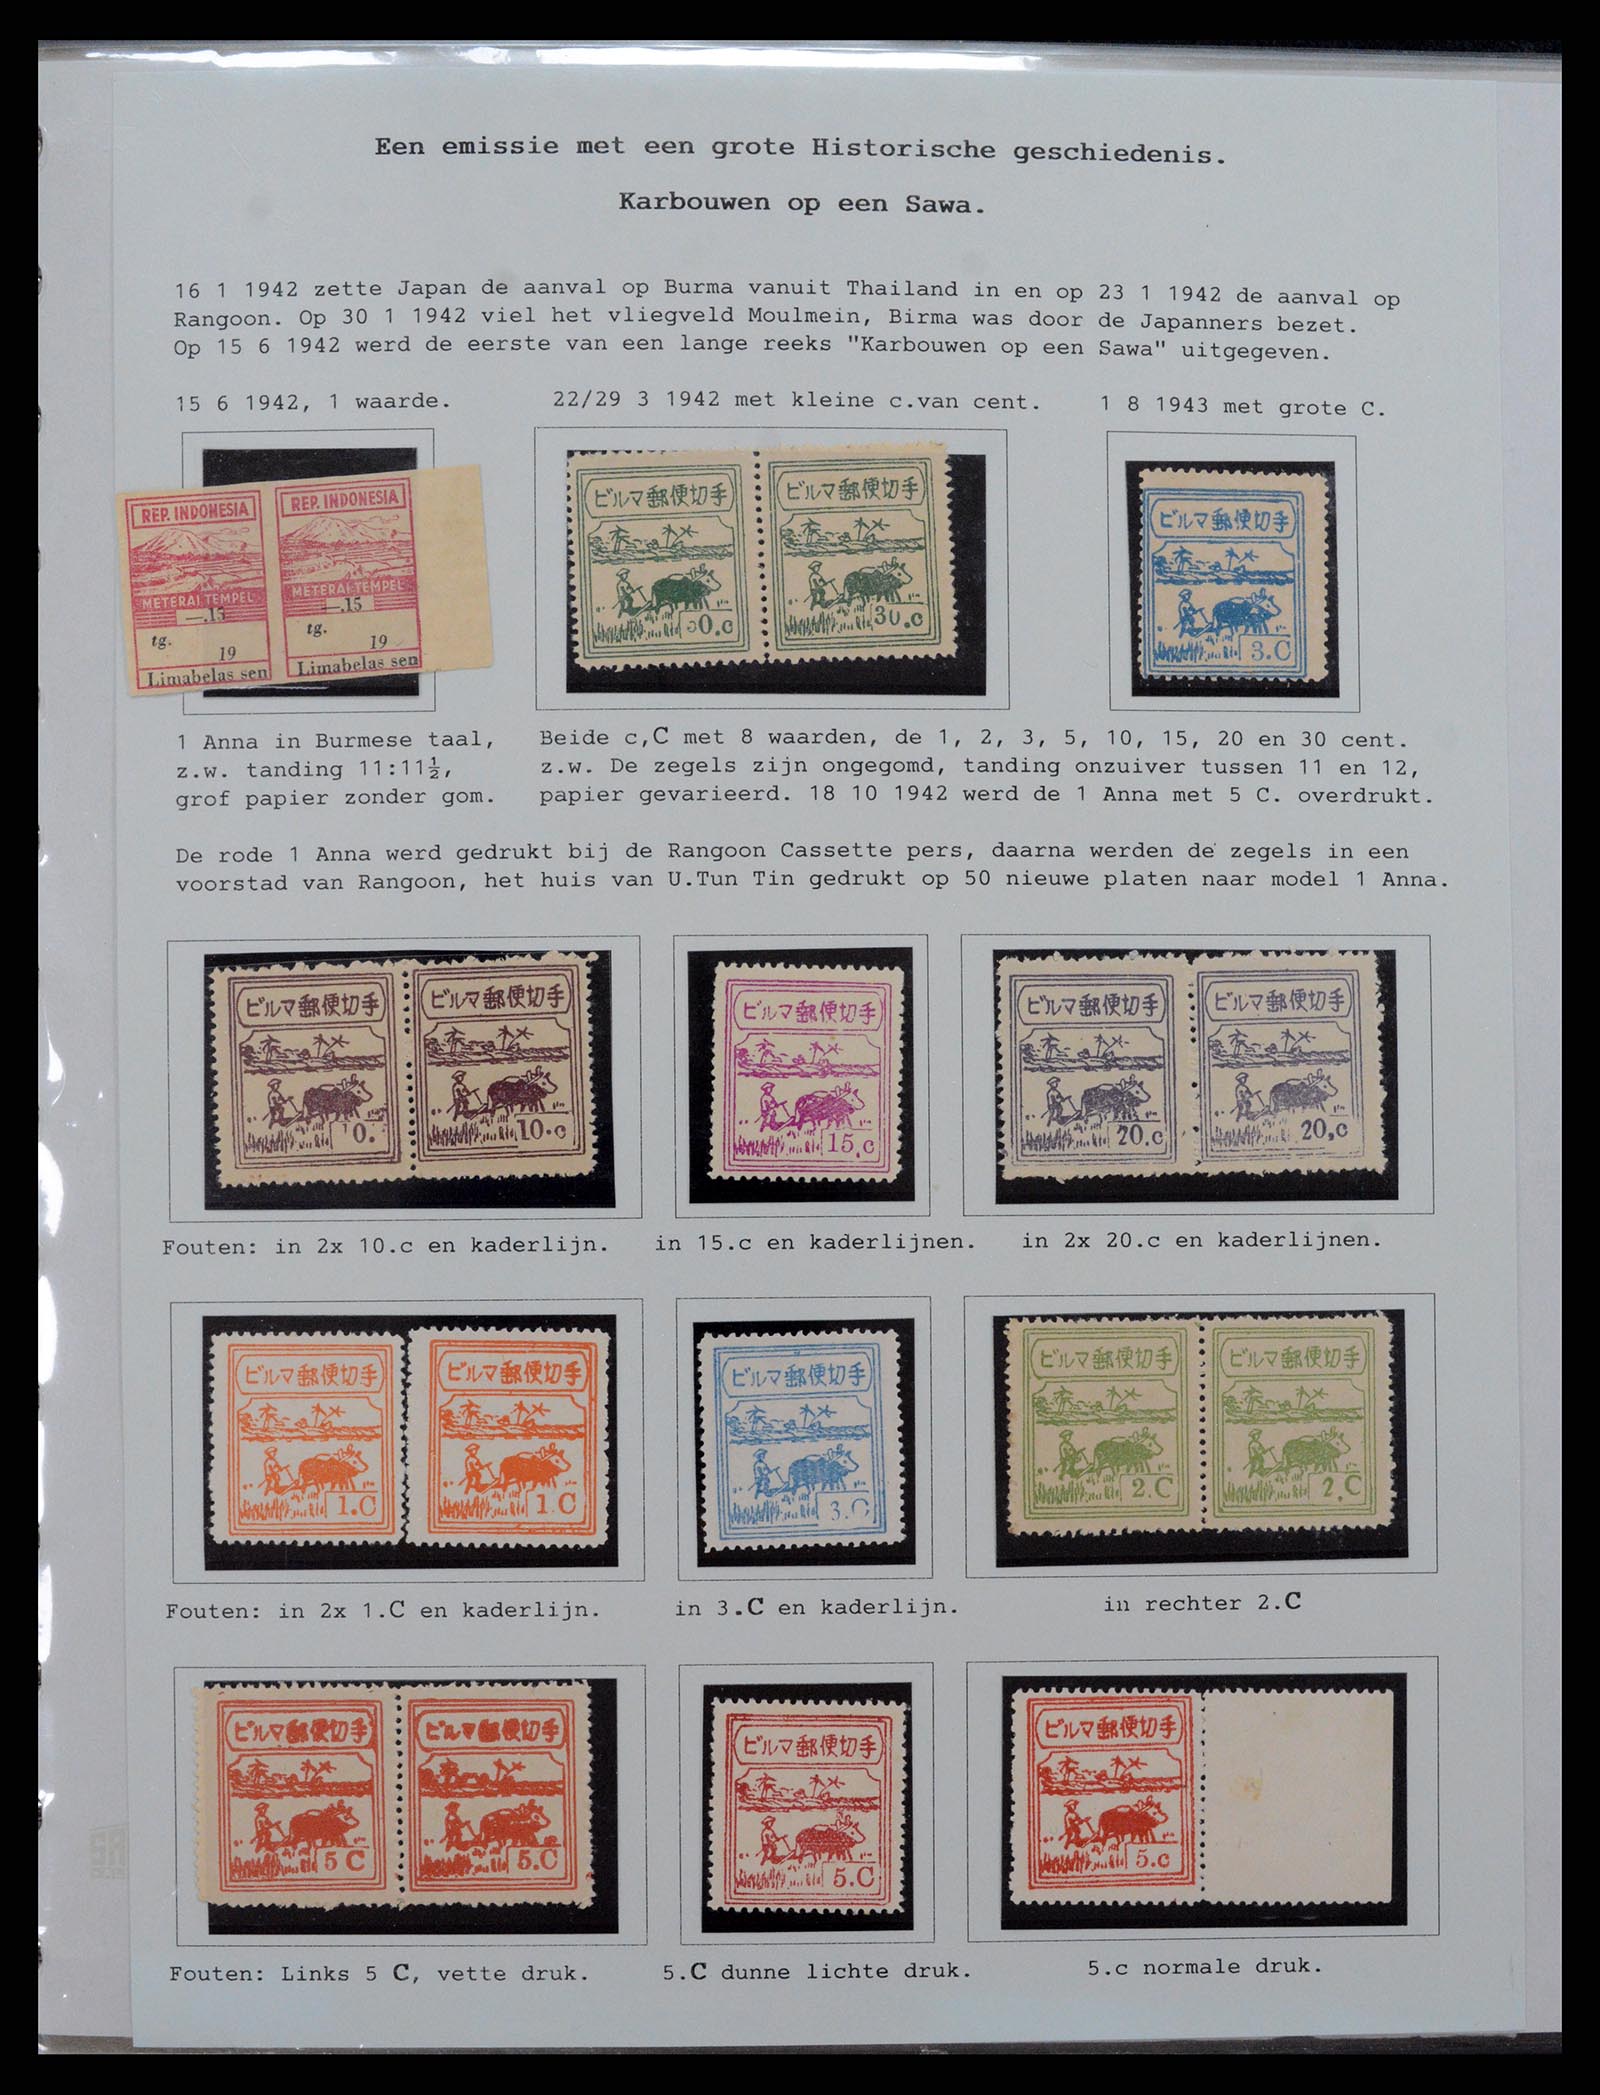 37689 001 - Stamp collection 37689 Japanese occupation Dutch East Indies and interim